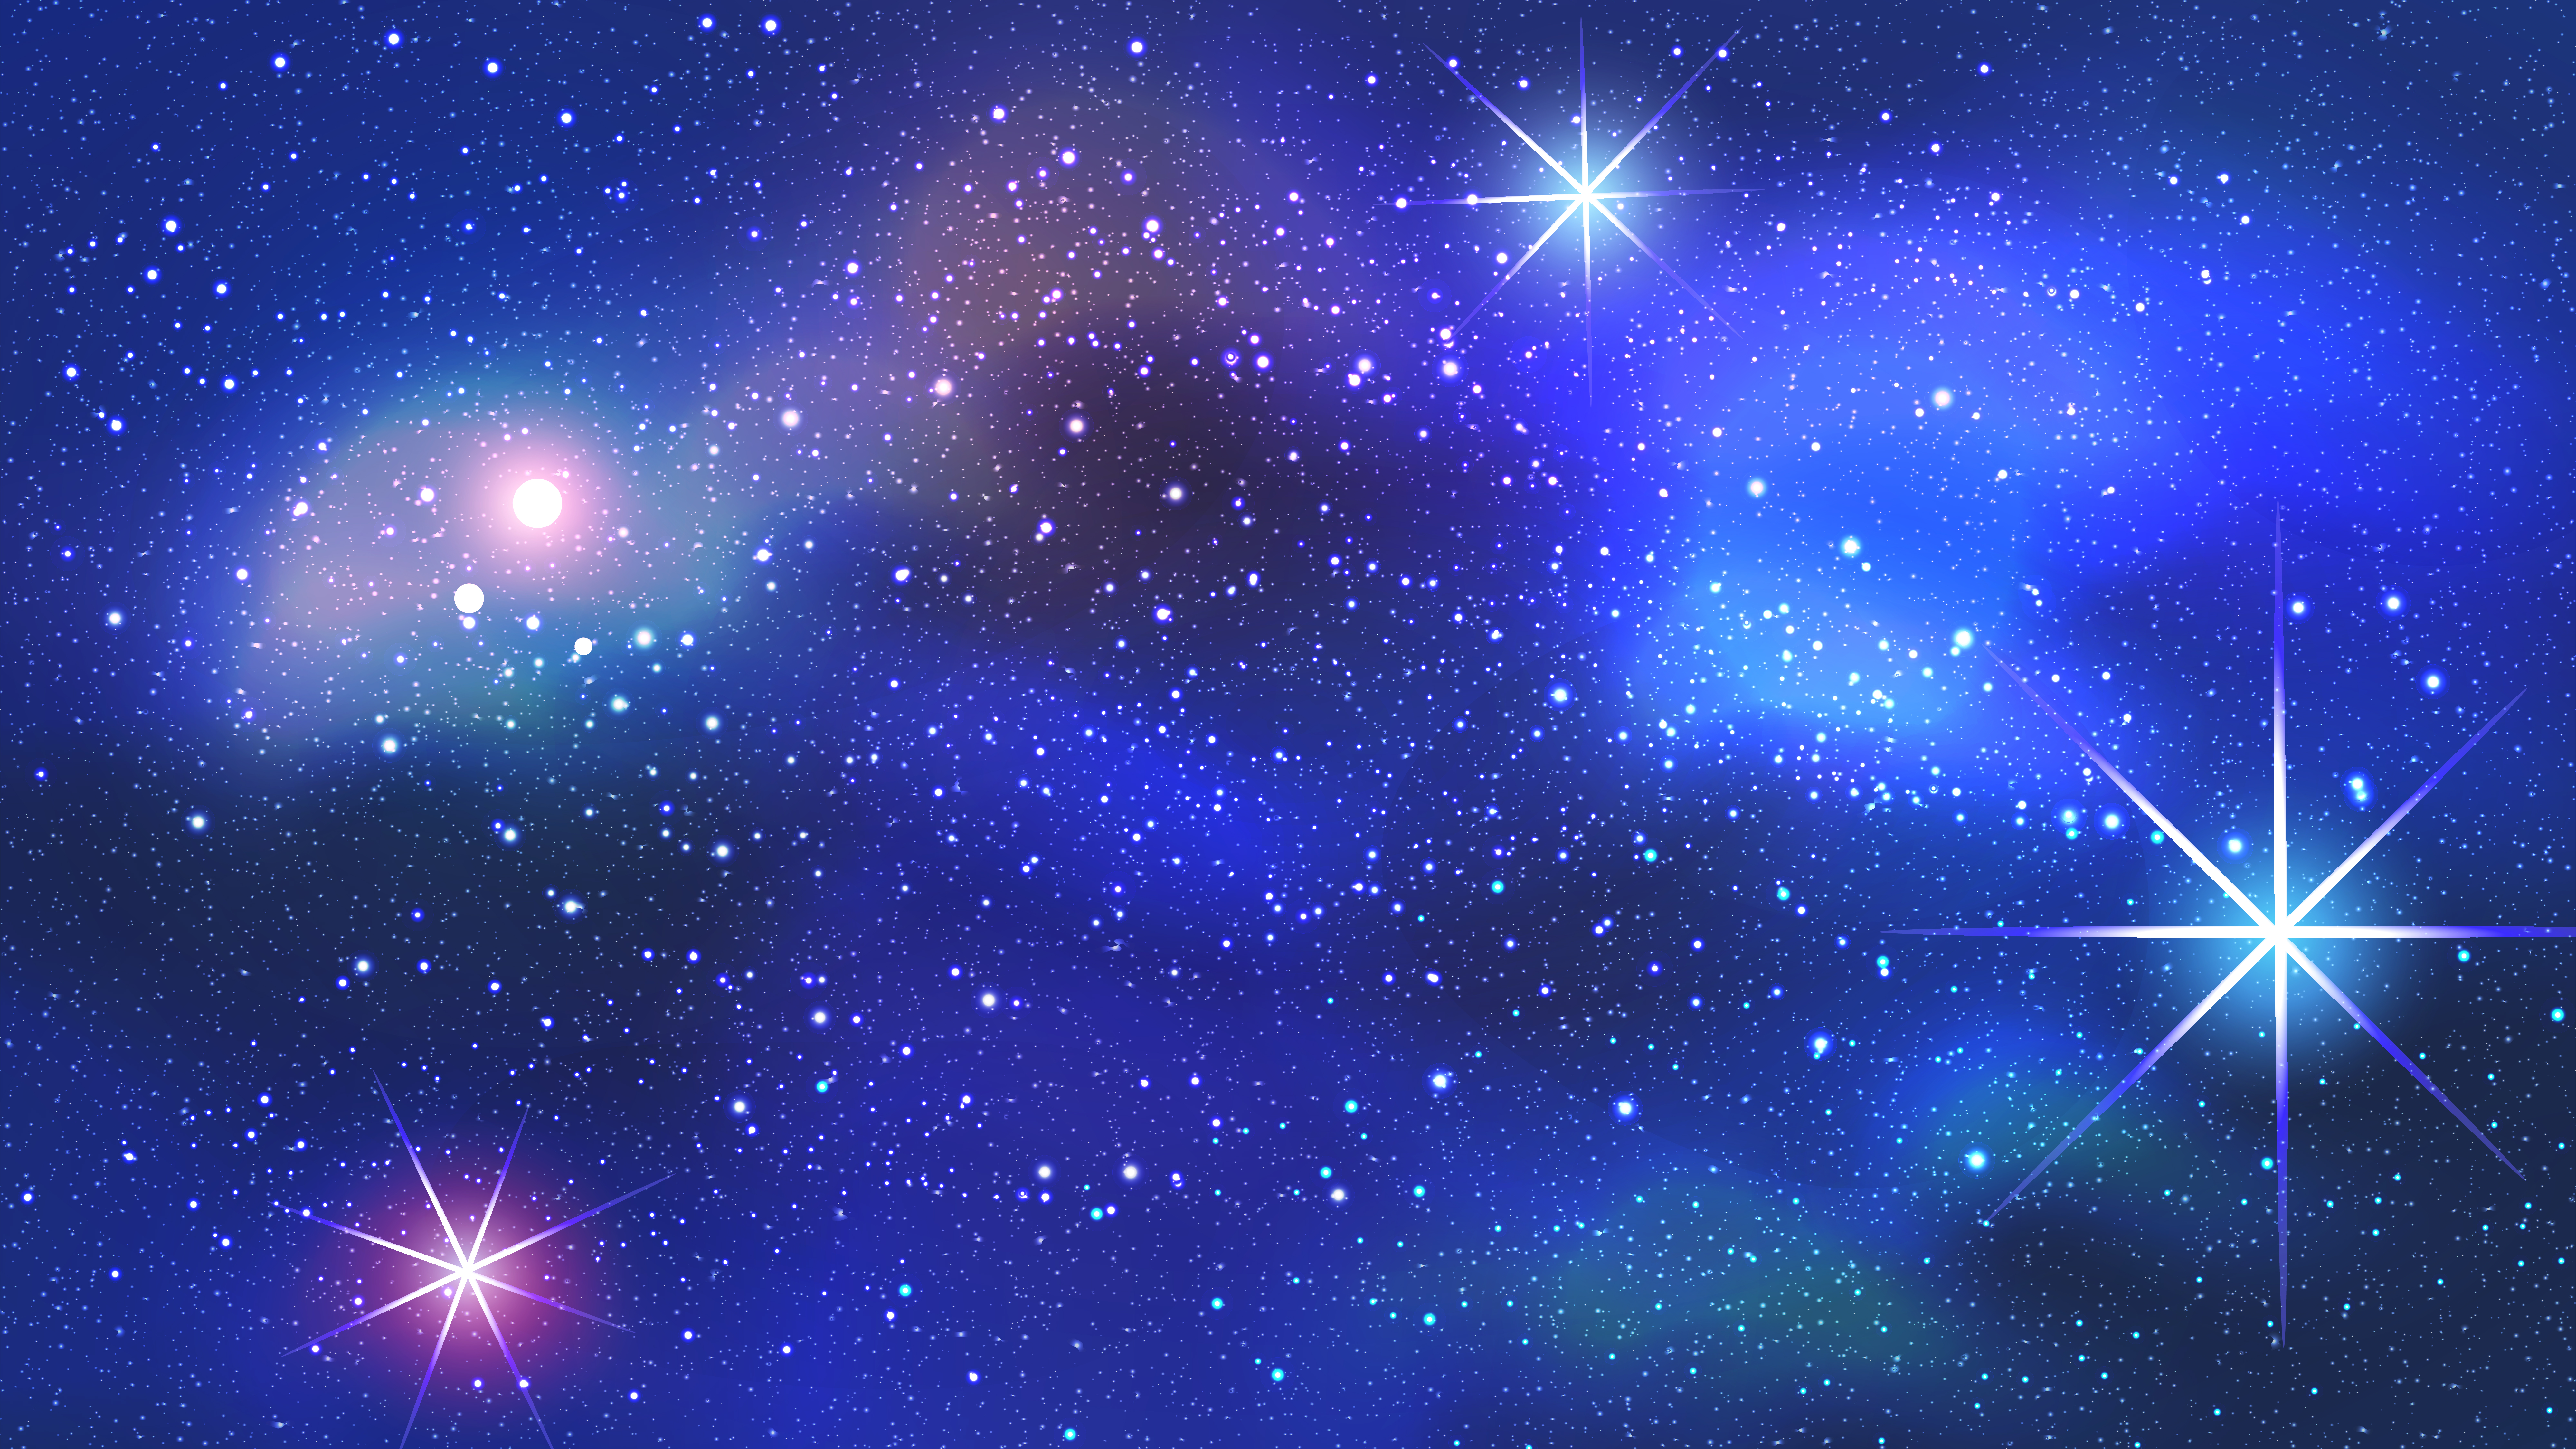 Space star designs ppt background